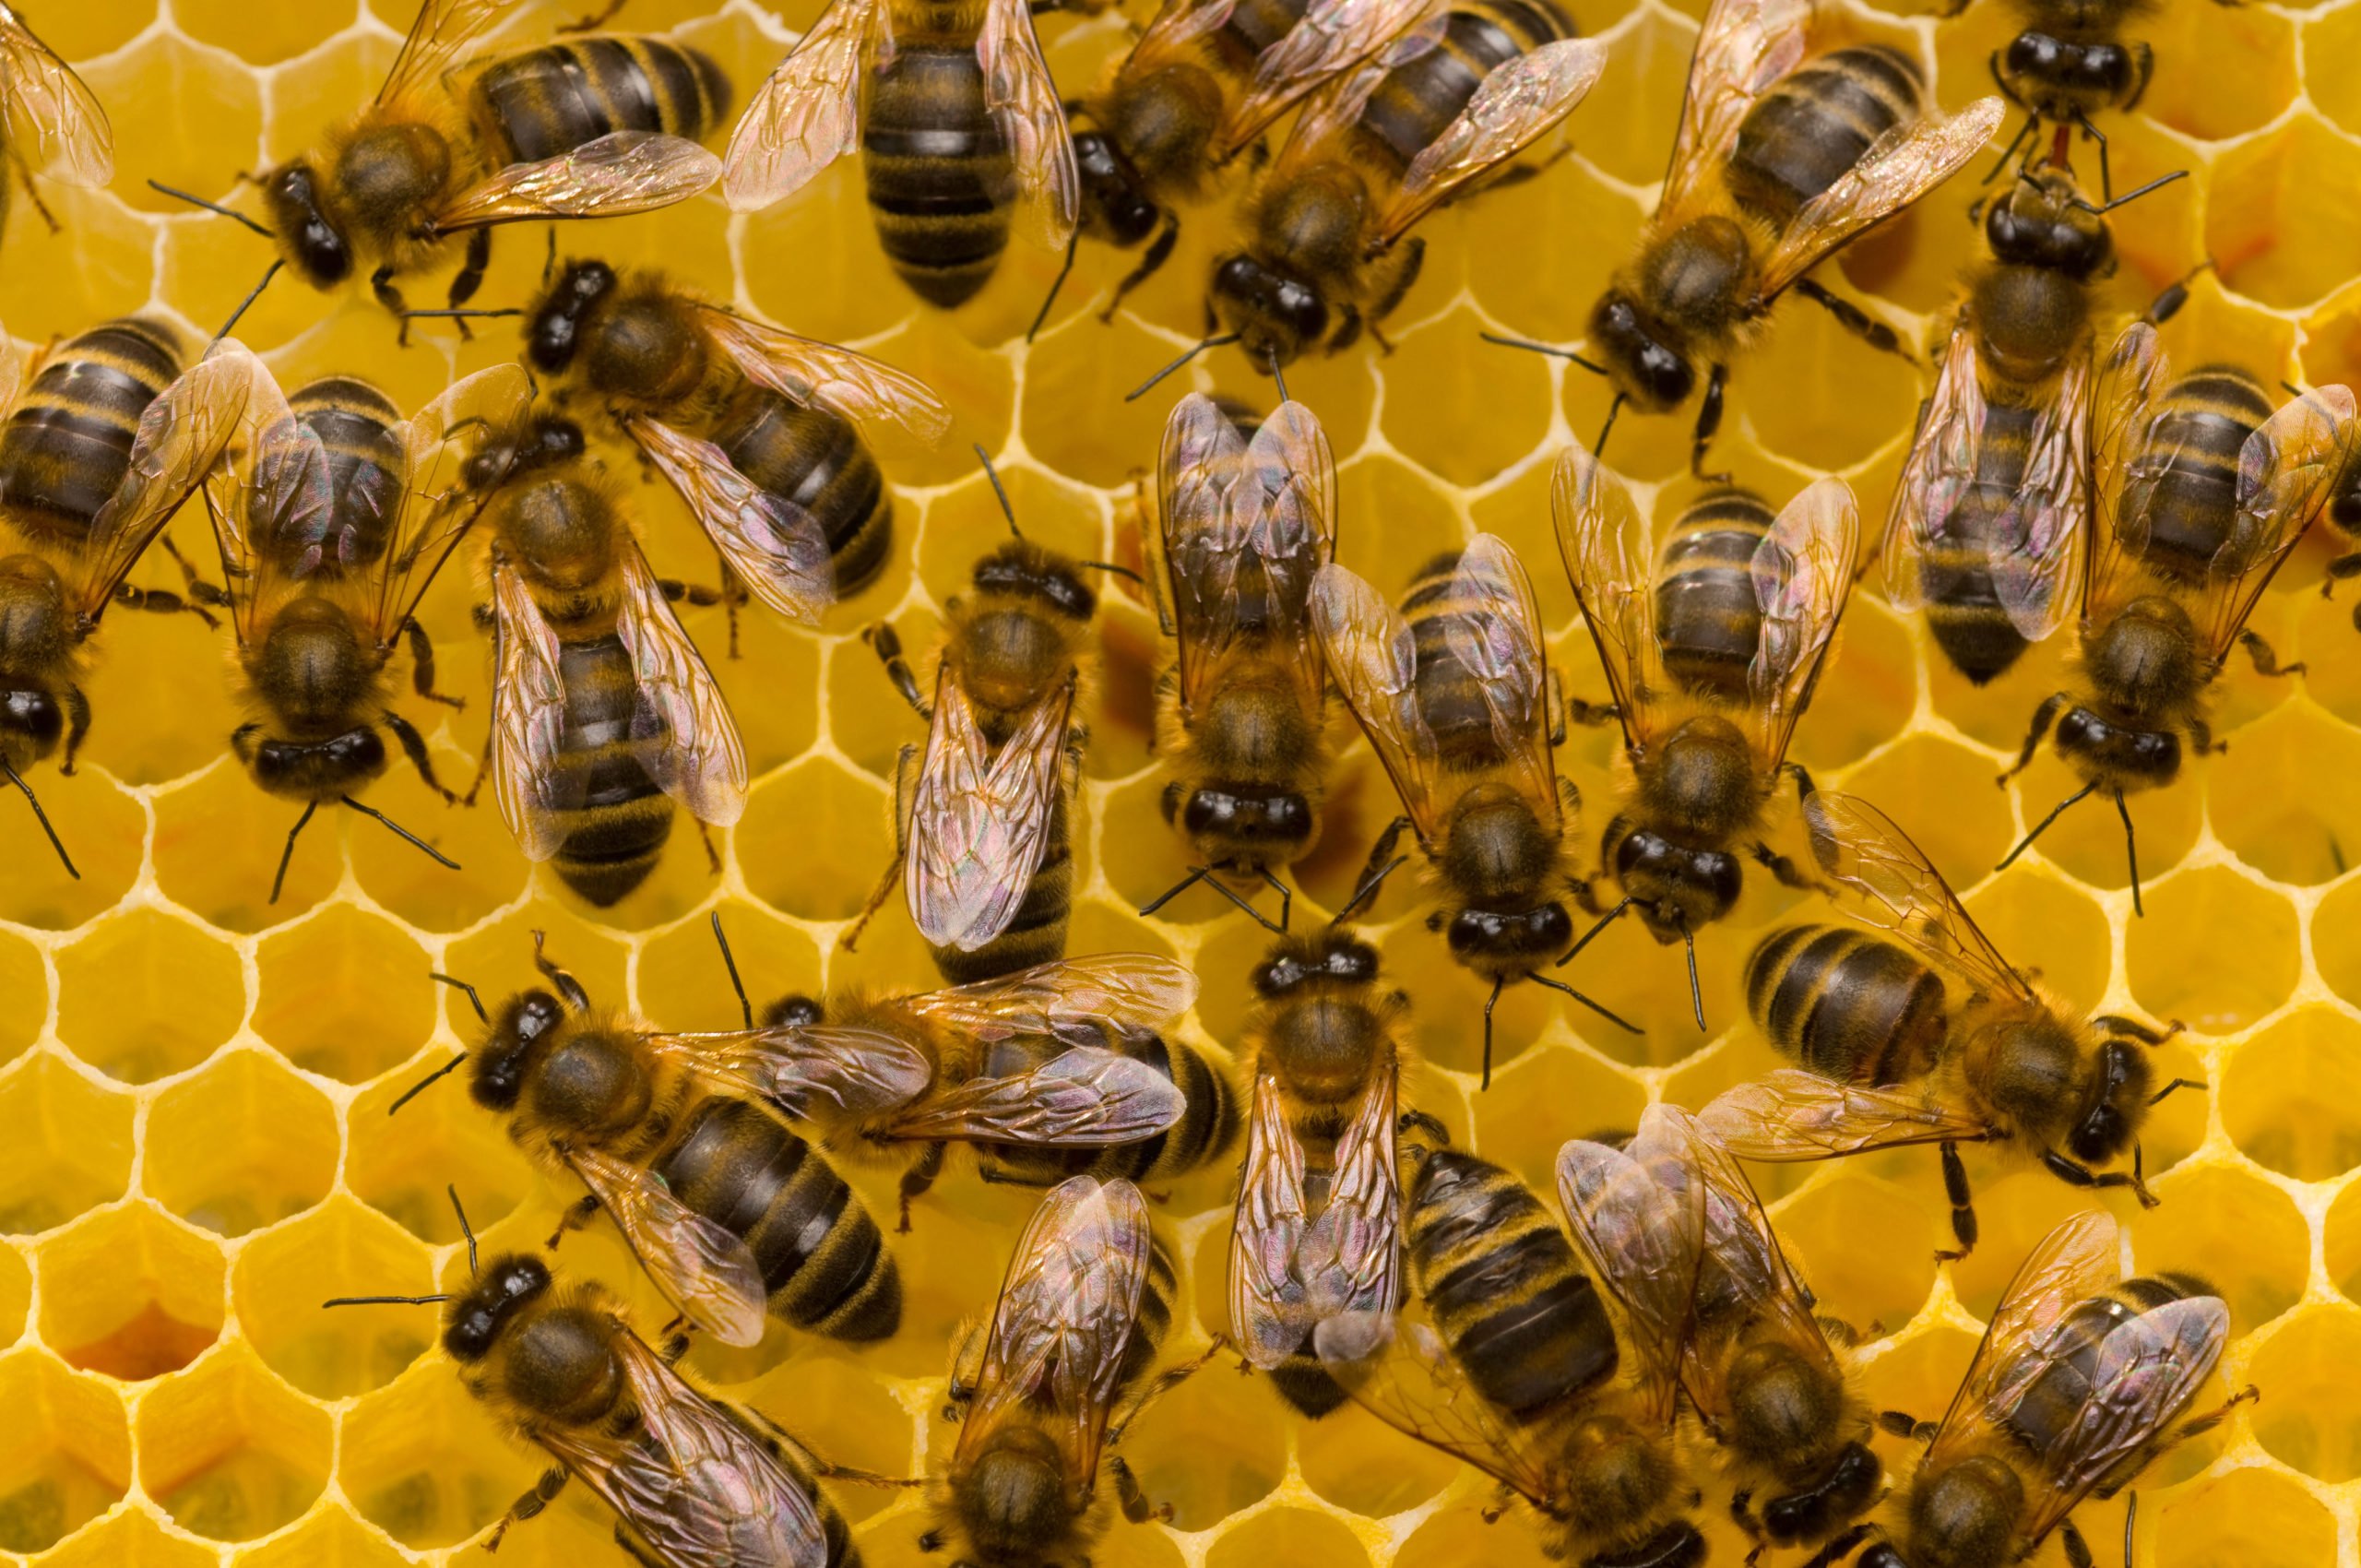 Bees seeking bacteria: How bees find their microbiome